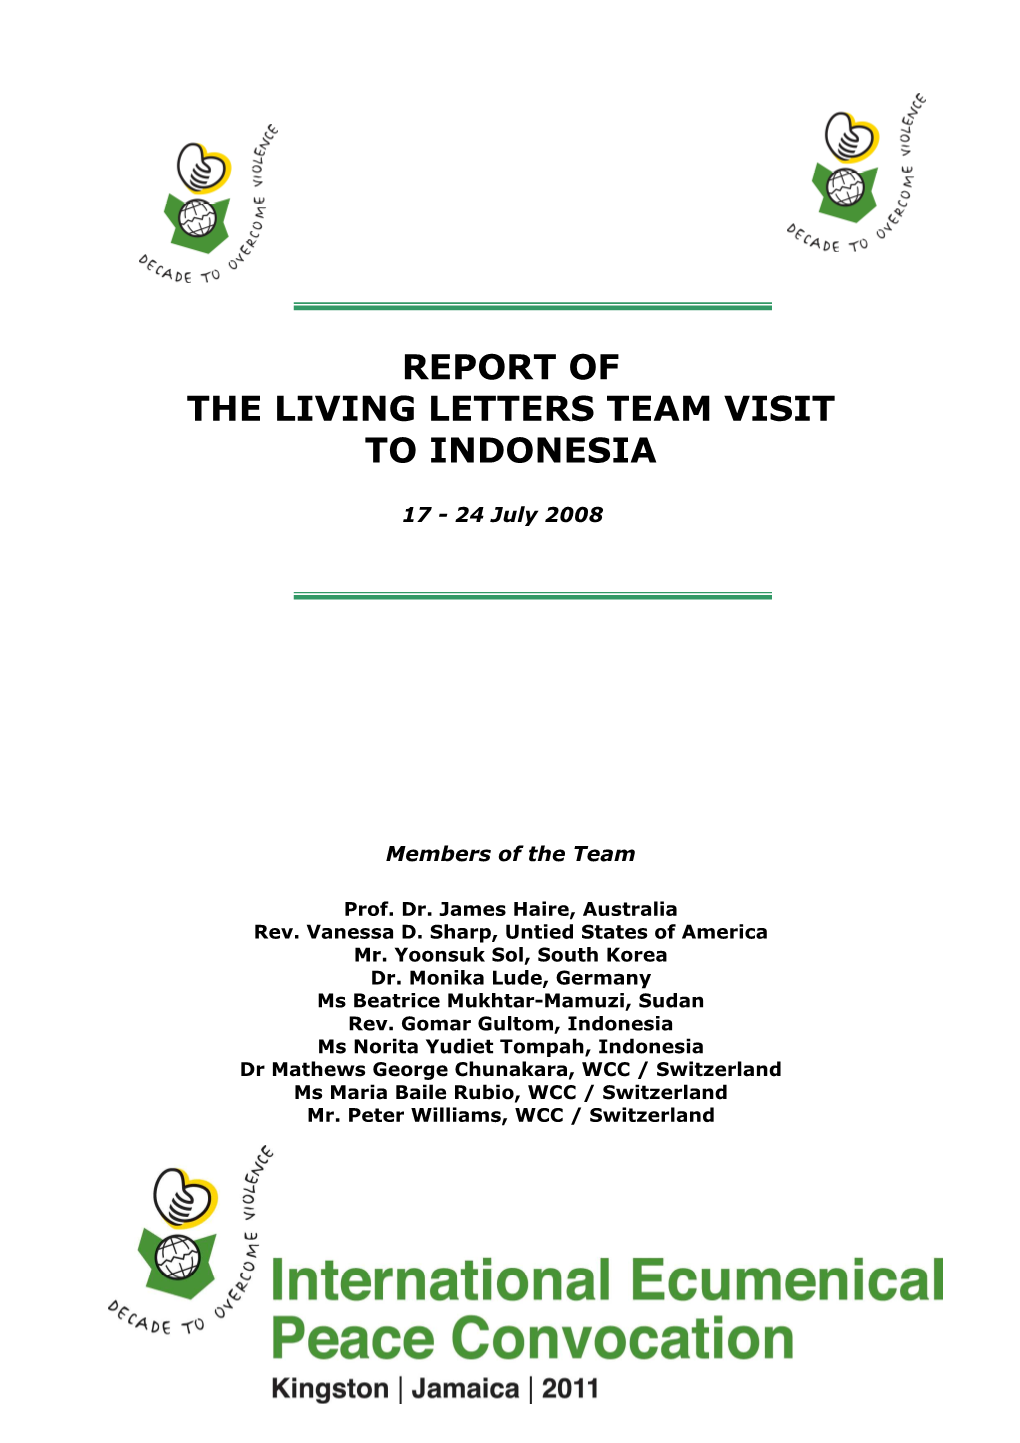 Download the Report of the WCC Living Letters Team Visit to Indonesia